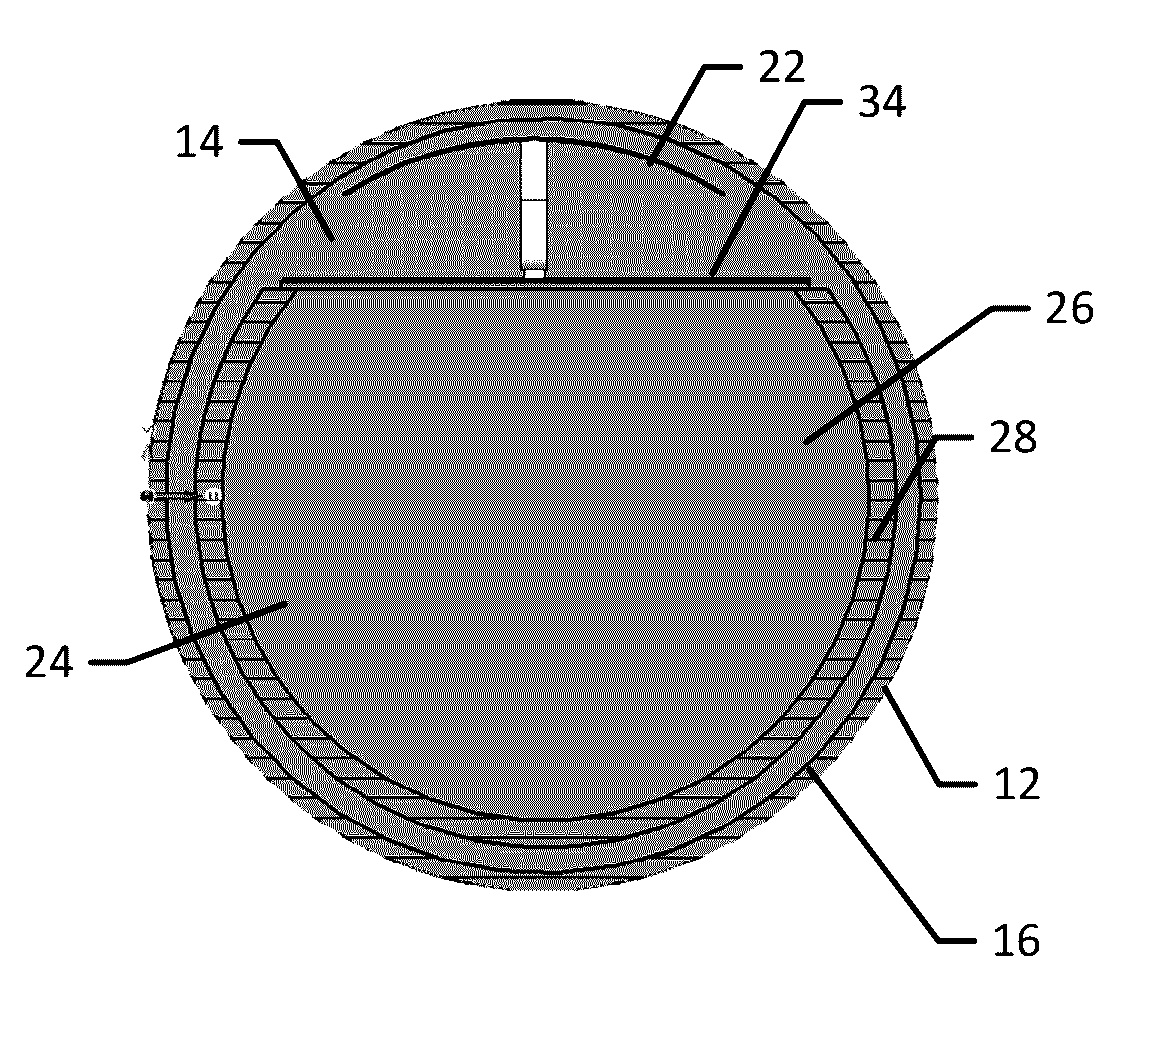 Wireless portable electronic device having a conductive body that functions as a radiator